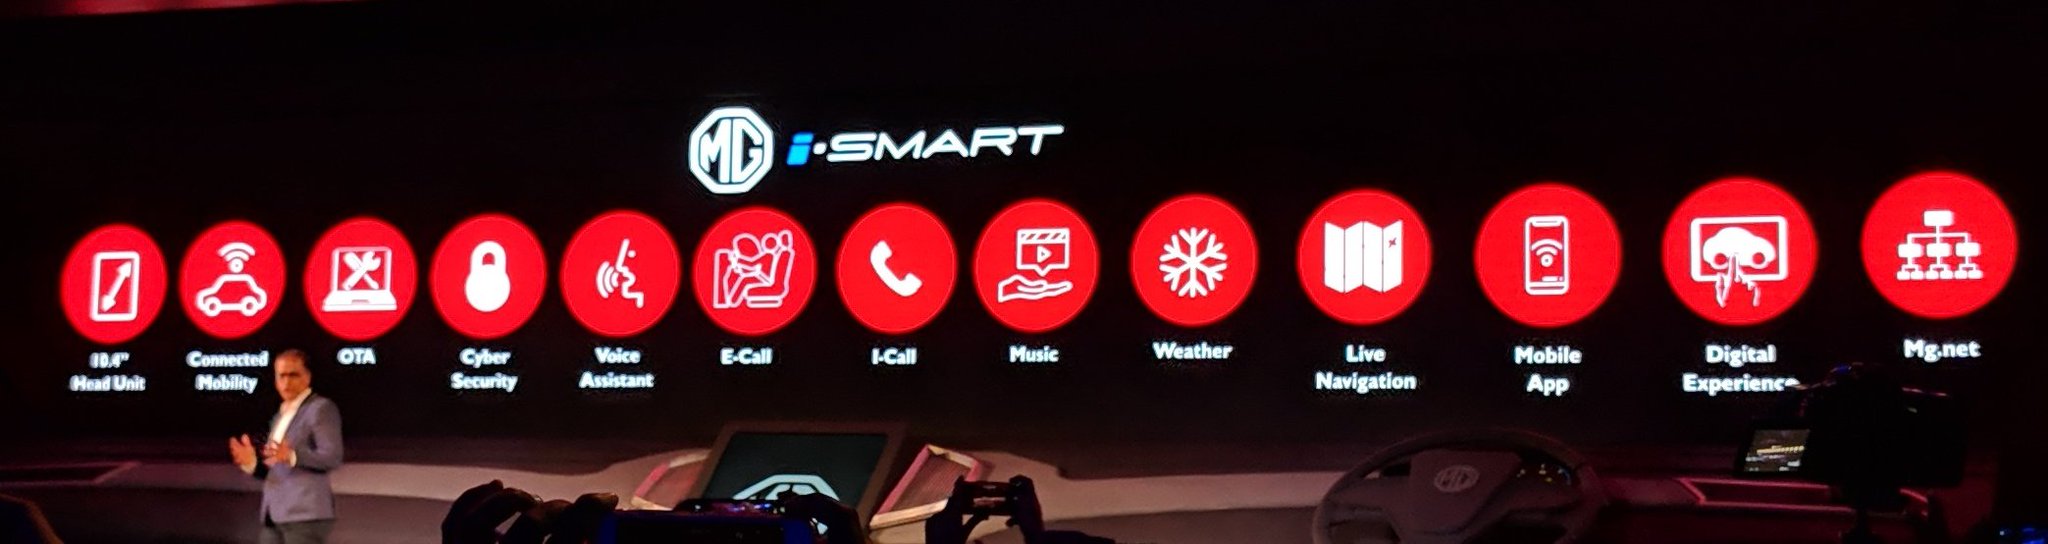 <p>MG&#39;s iSmart comprehensive infotainment/assistance package will be offered free to customers for the first few years.&nbsp;</p>